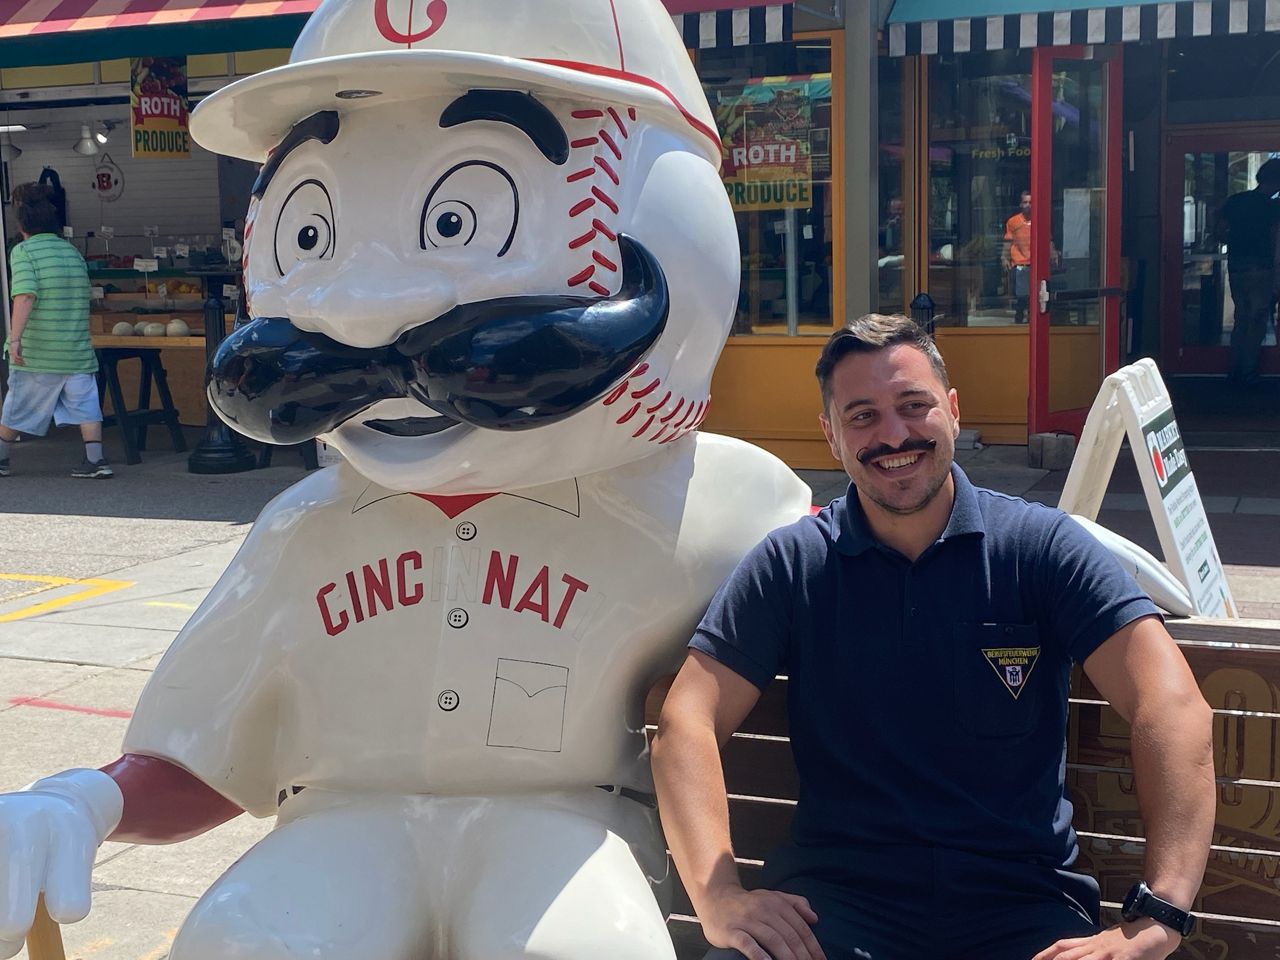 Philip Knecht, of Munich, Germany, poses with a Cincinnati Reds statue at Findlay Market in Cincinnati, Ohio.